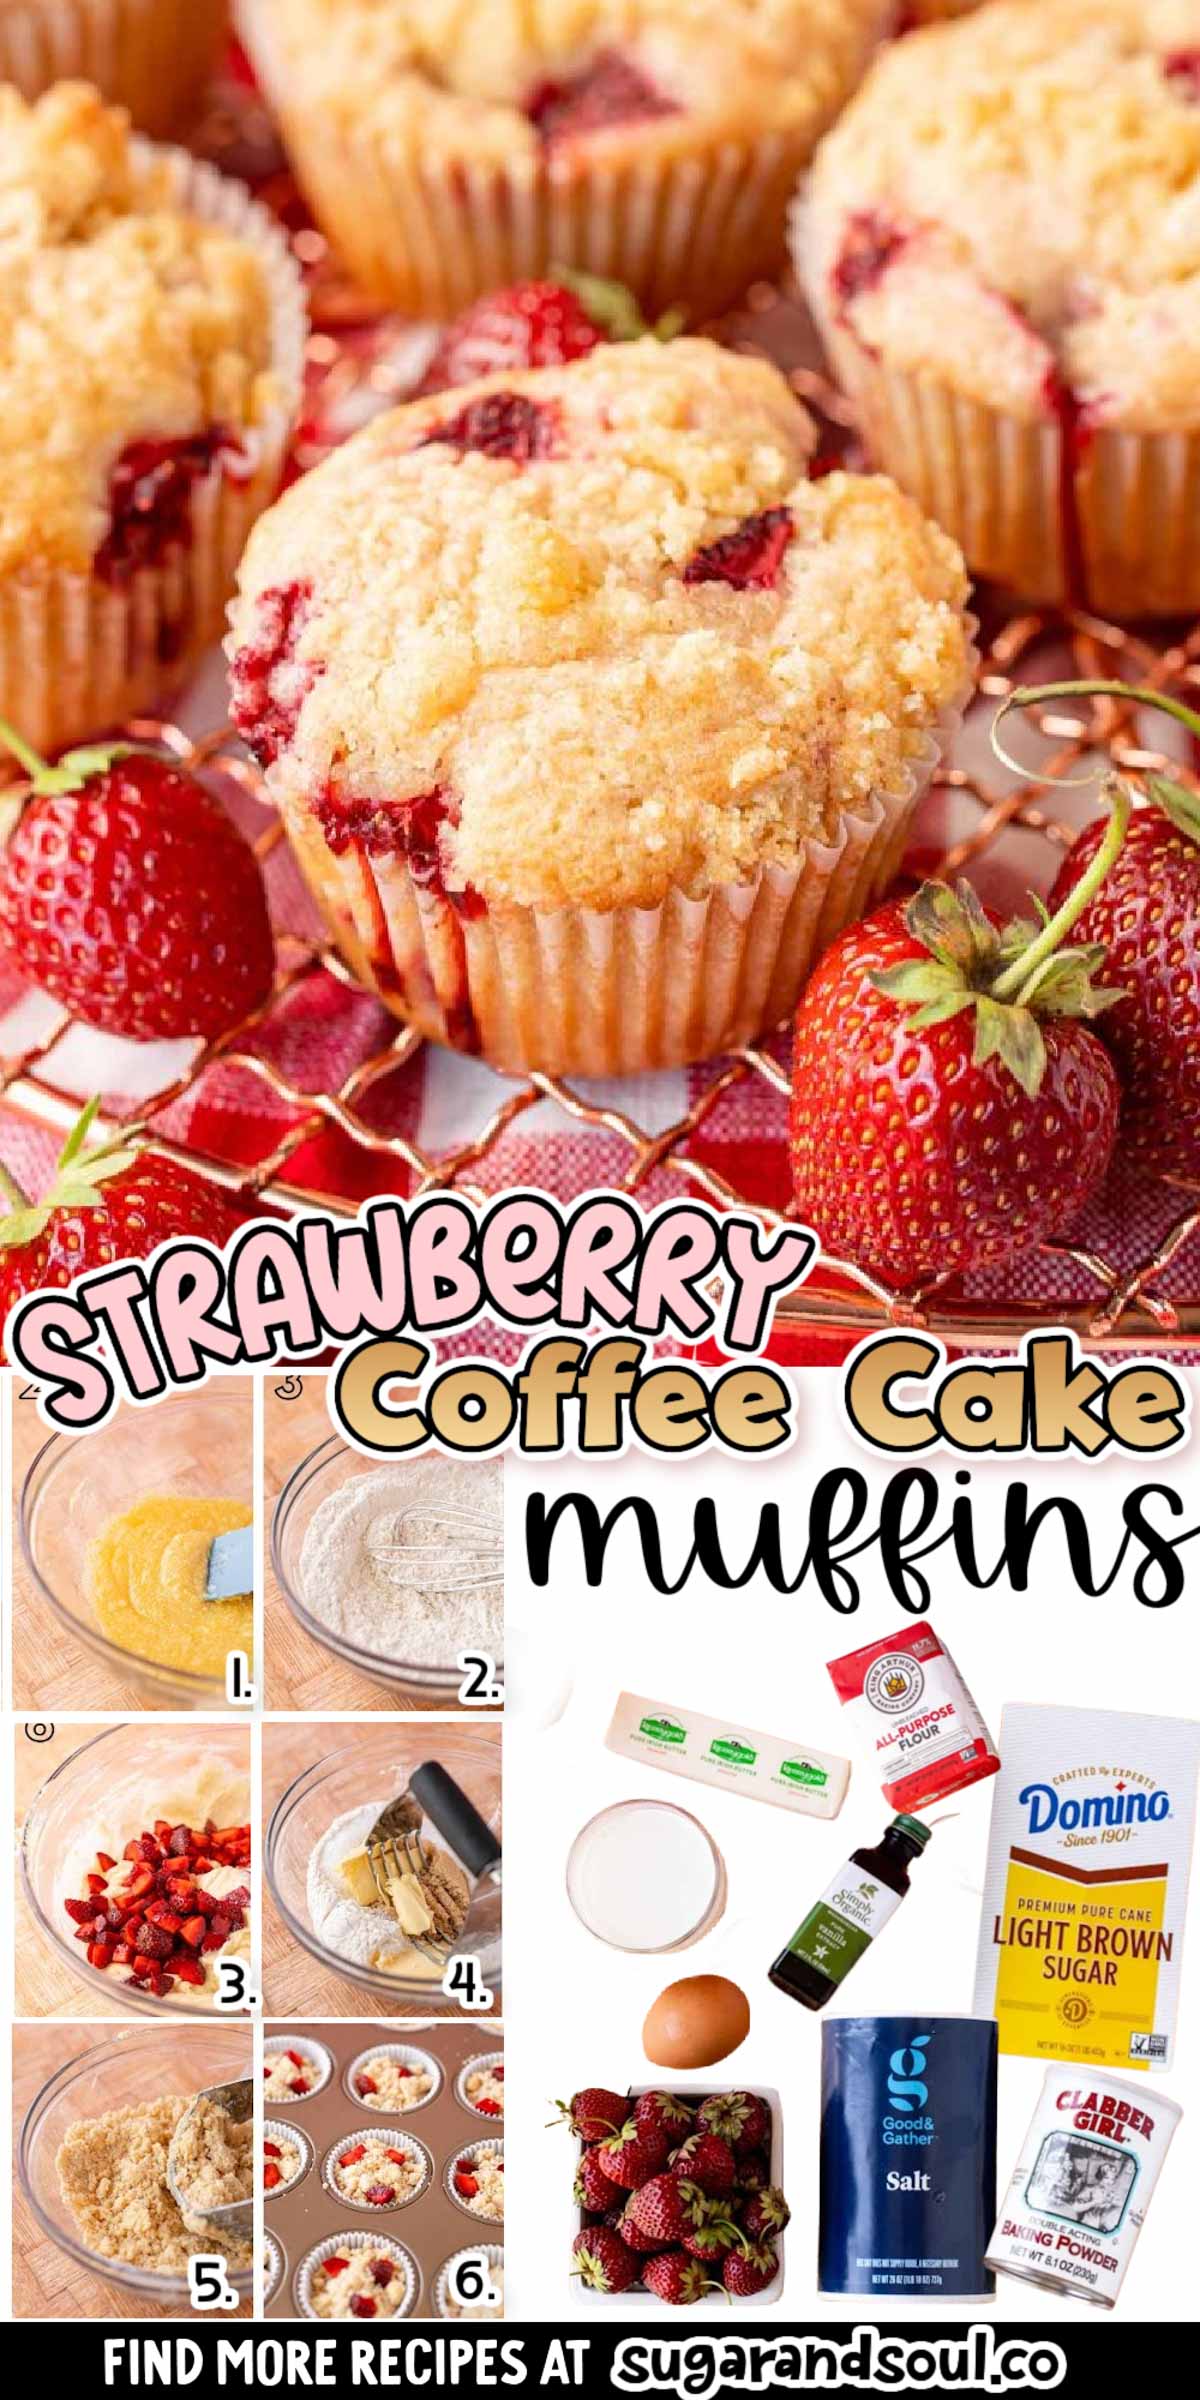 These Strawberry Coffee Cake Muffins are made with sweet fresh berries and buttermilk then topped with a delicious sugar and butter crumble! Pull these homemade muffins out of the oven after just 20 minutes of baking! via @sugarandsoulco